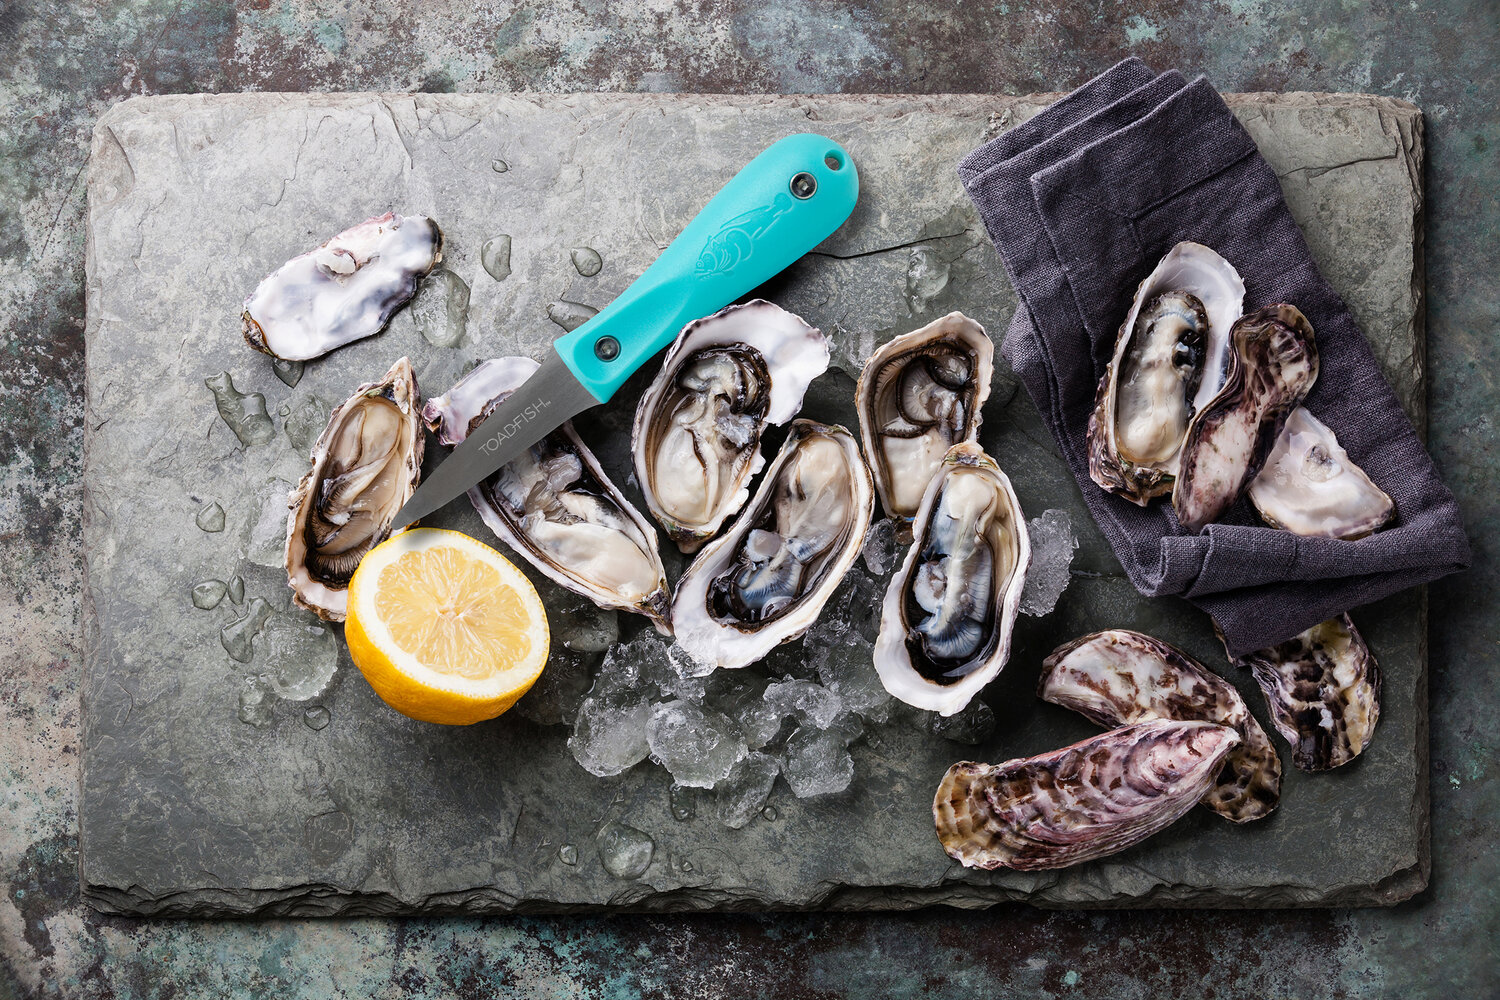 https://images.squarespace-cdn.com/content/v1/6026ba33122c051801086712/1614007693086-RFPAETXK7ONFMUE2CAA9/TF+knife+with+oysters+and+slate+cutting+board.jpg?format=1500w